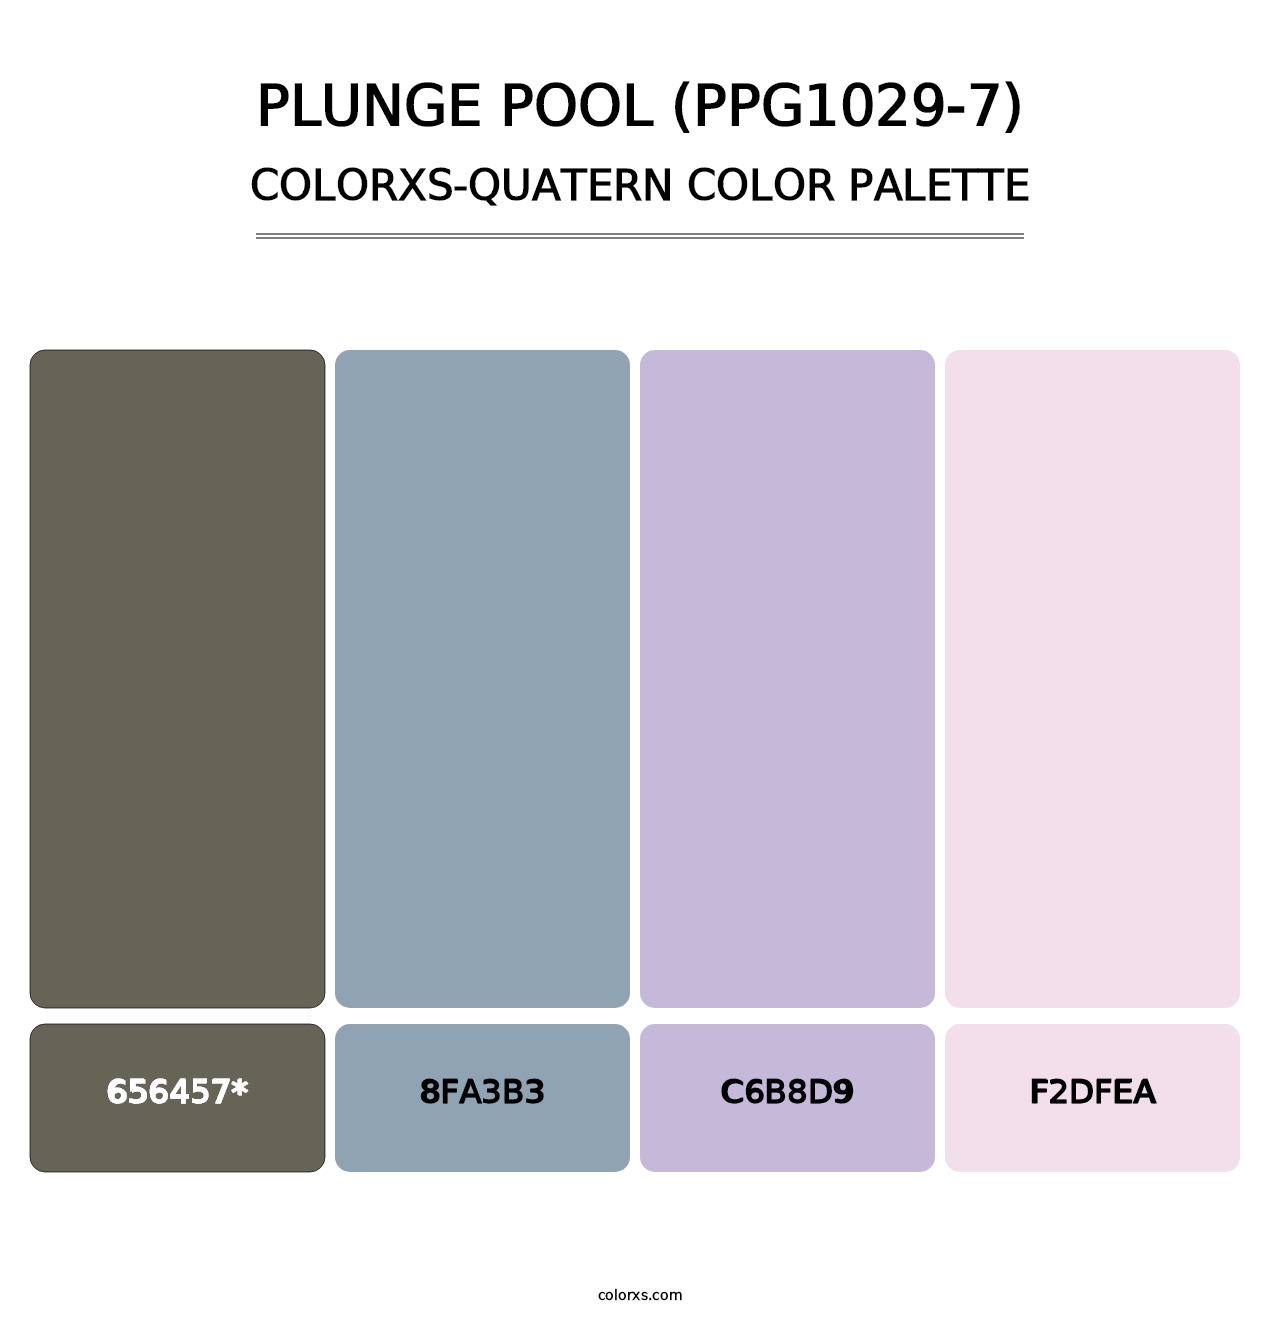 Plunge Pool (PPG1029-7) - Colorxs Quatern Palette